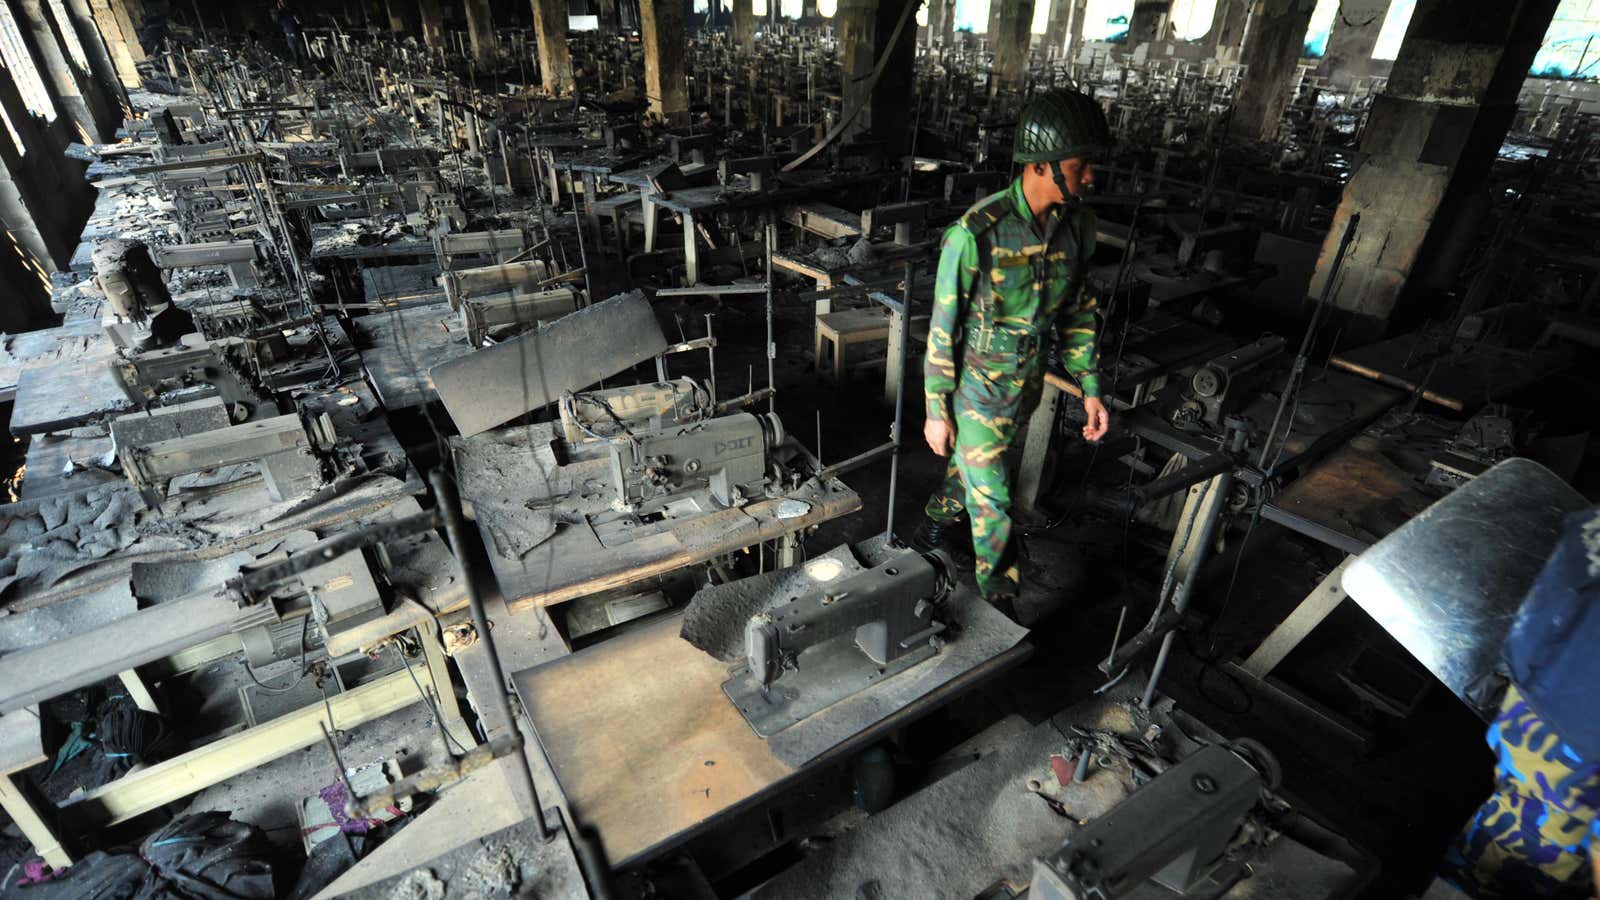 Rows of sewing machines in the Bangladeshi garment factory where more than 100 workers died in a fire